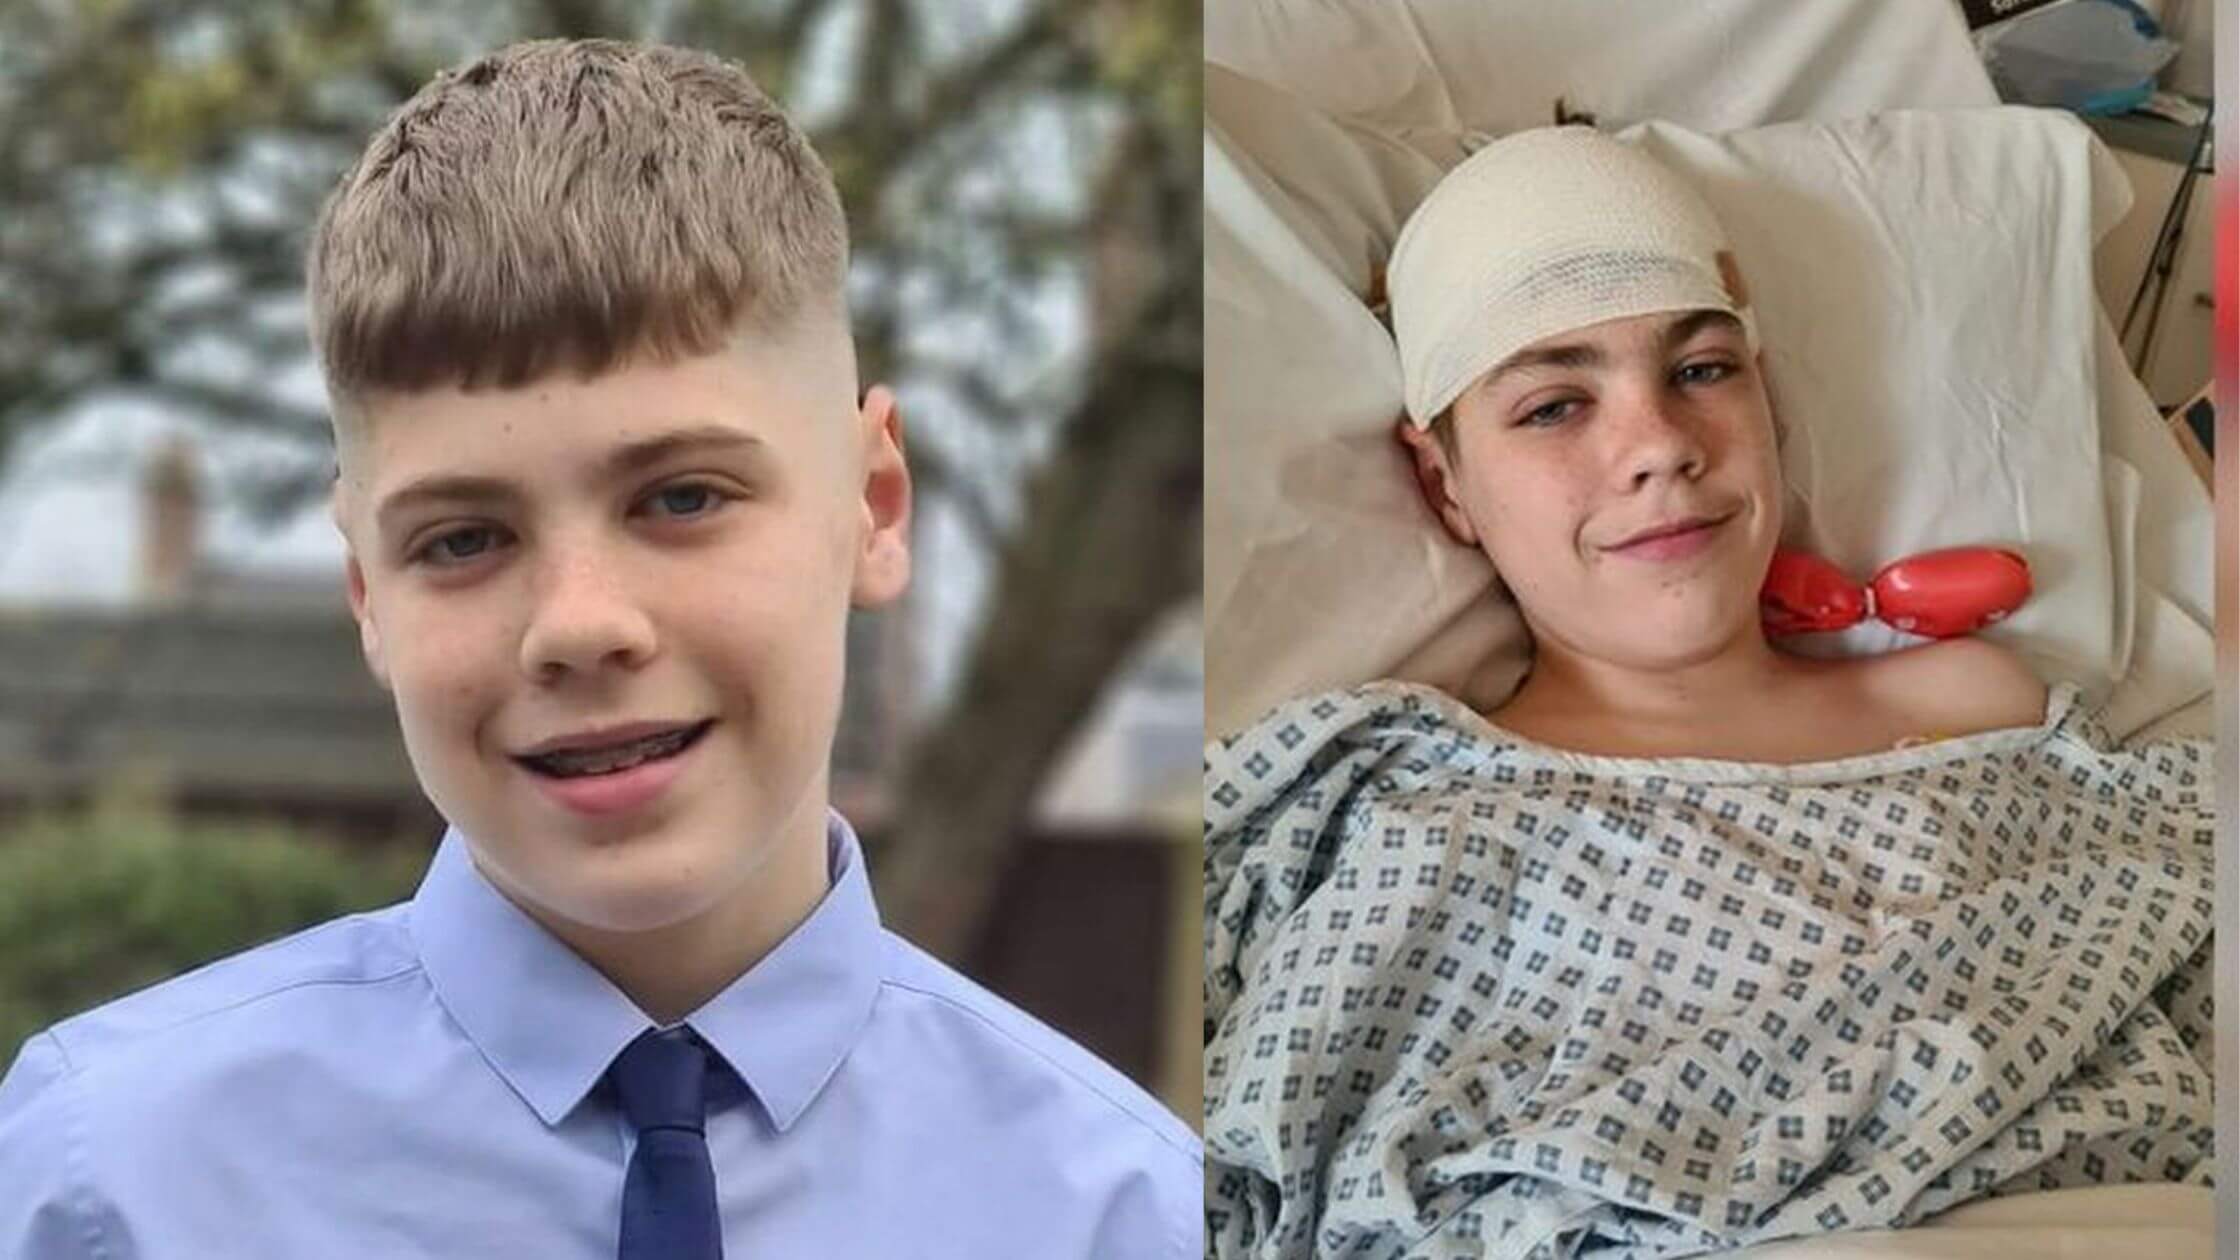 Teen Footballer Misdiagnosed  With A Long Covid Before Doctor Discover A Brain Tumor